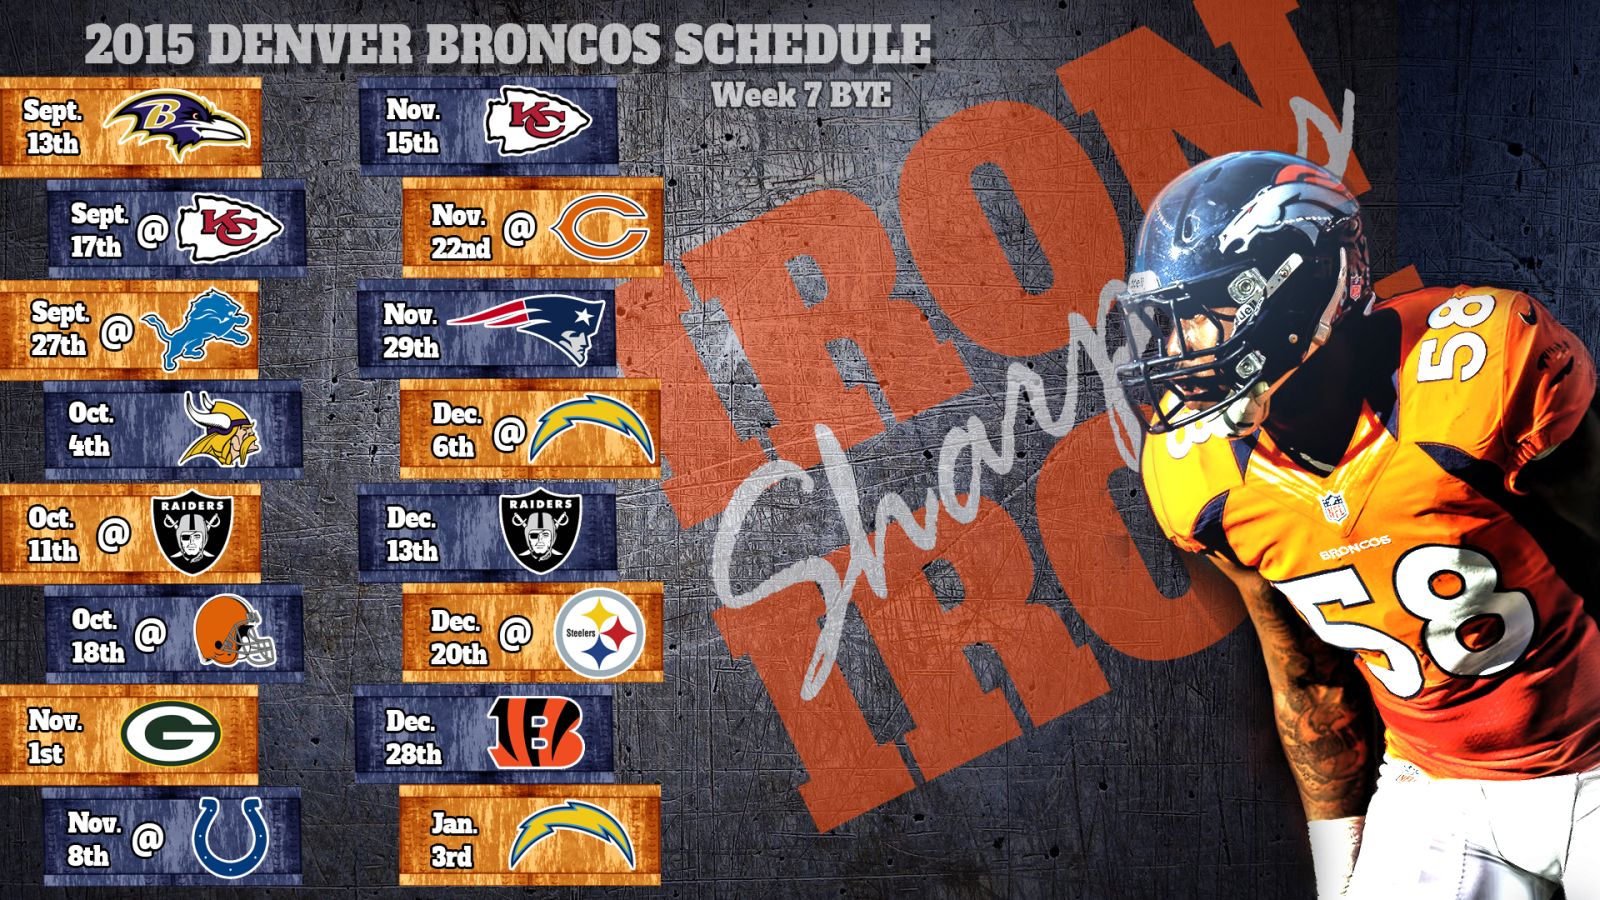 So who / where is our guy who designs those awesome Pats schedules